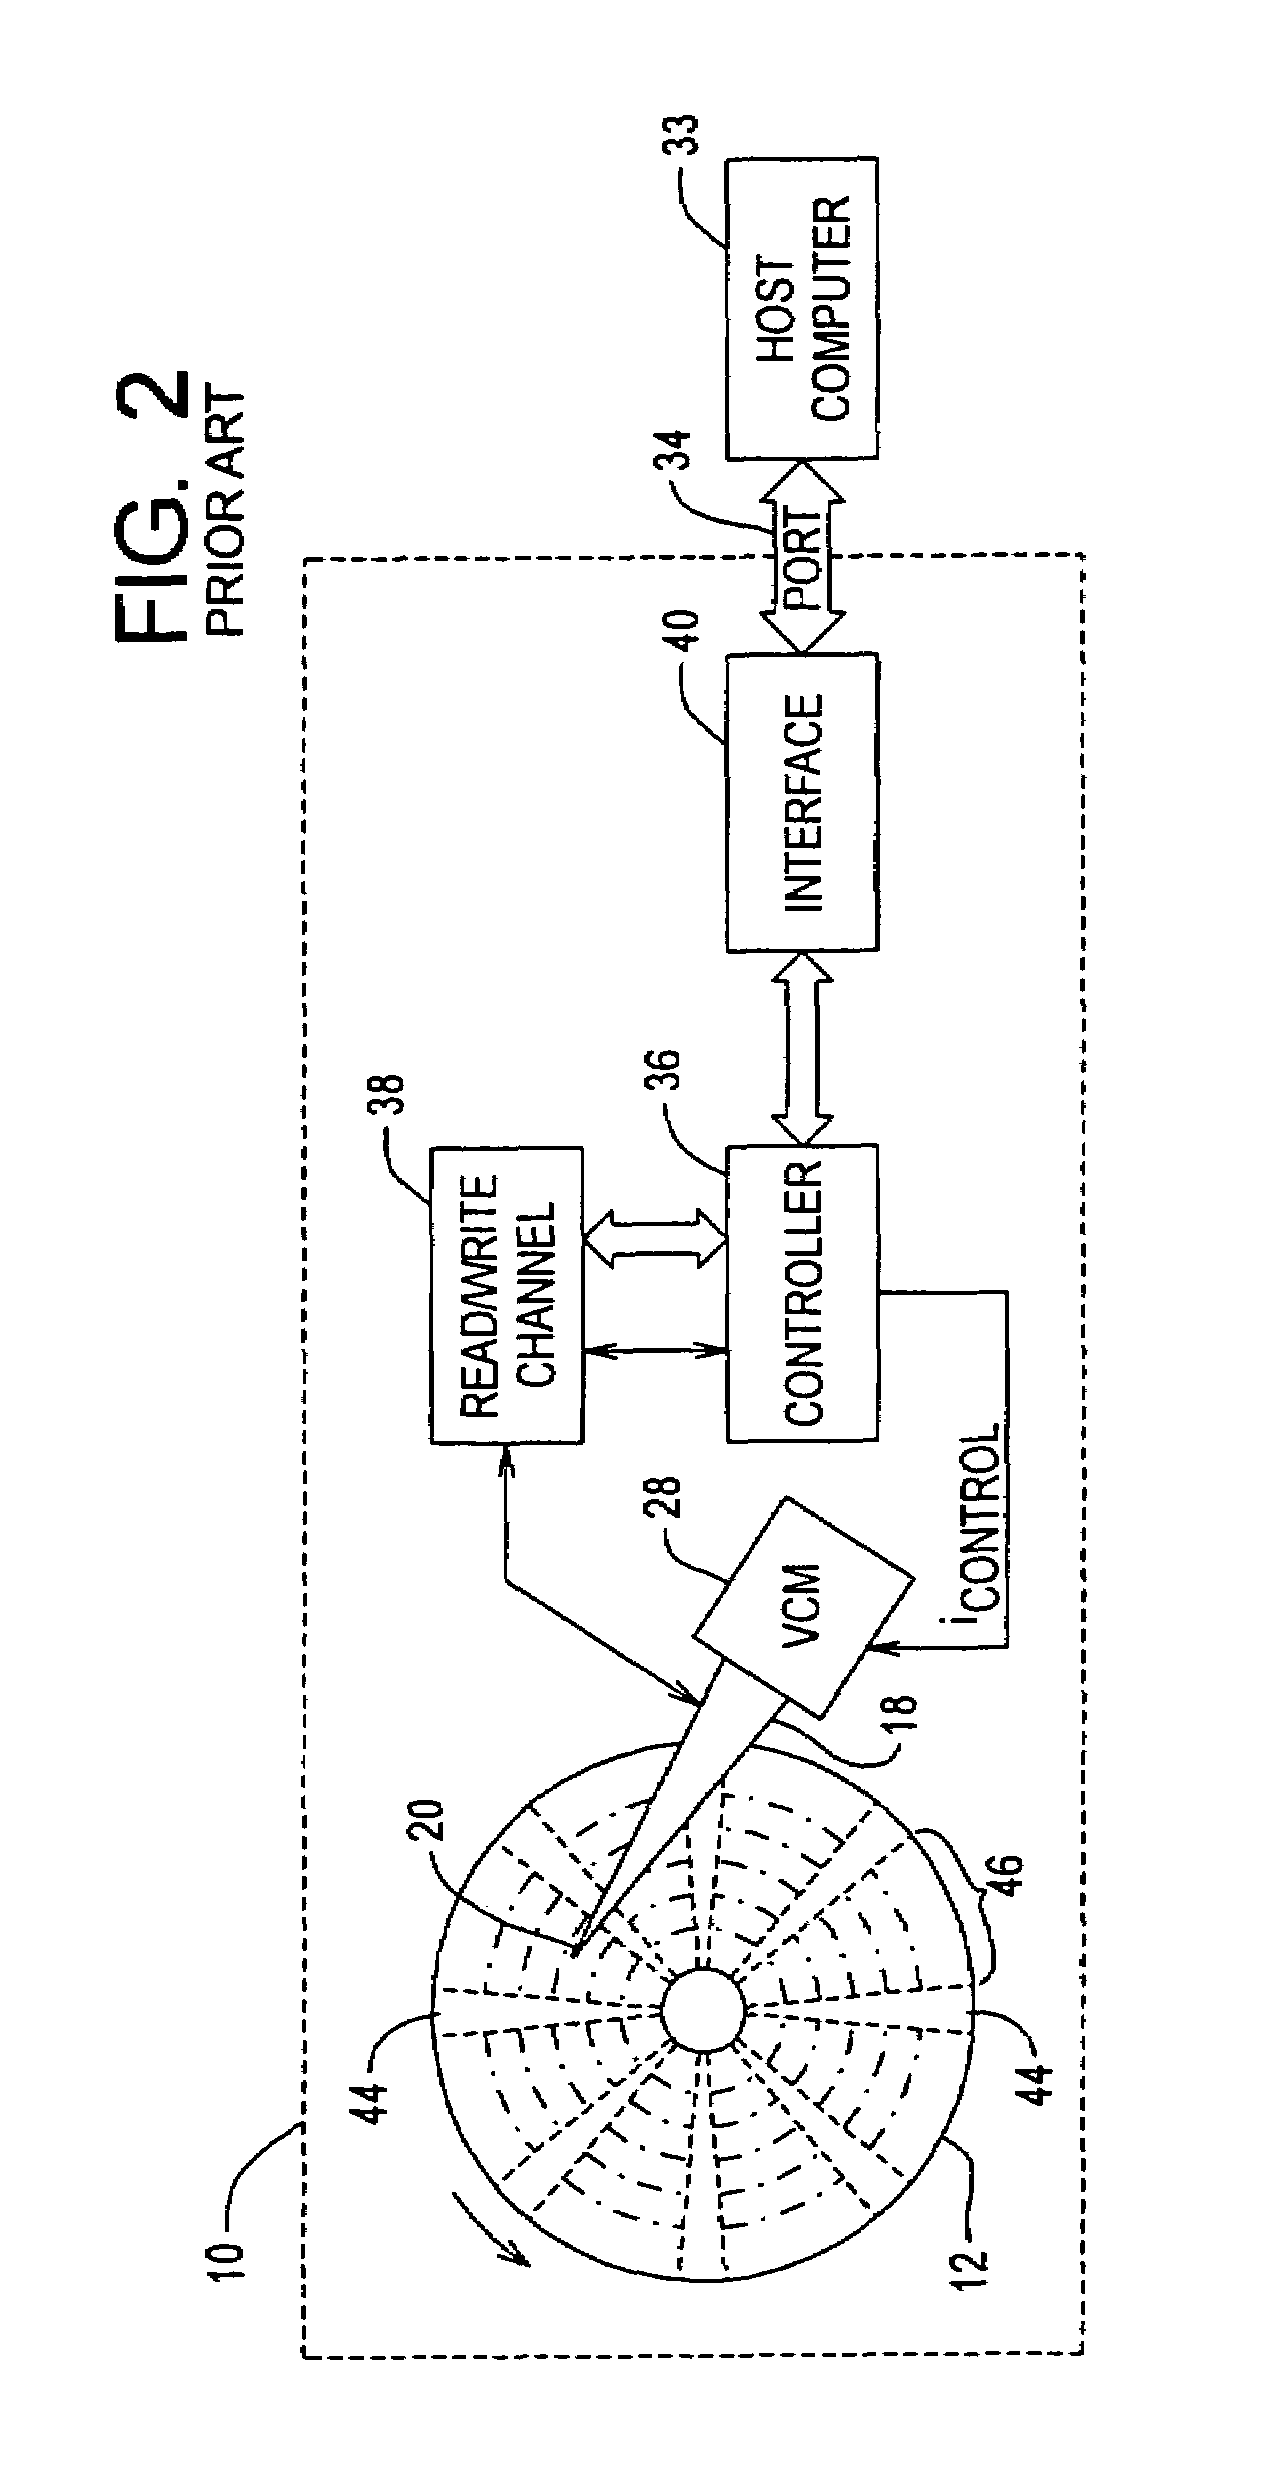 Method and apparatus for reducing velocity errors when writing spiral servo information onto a disk surface